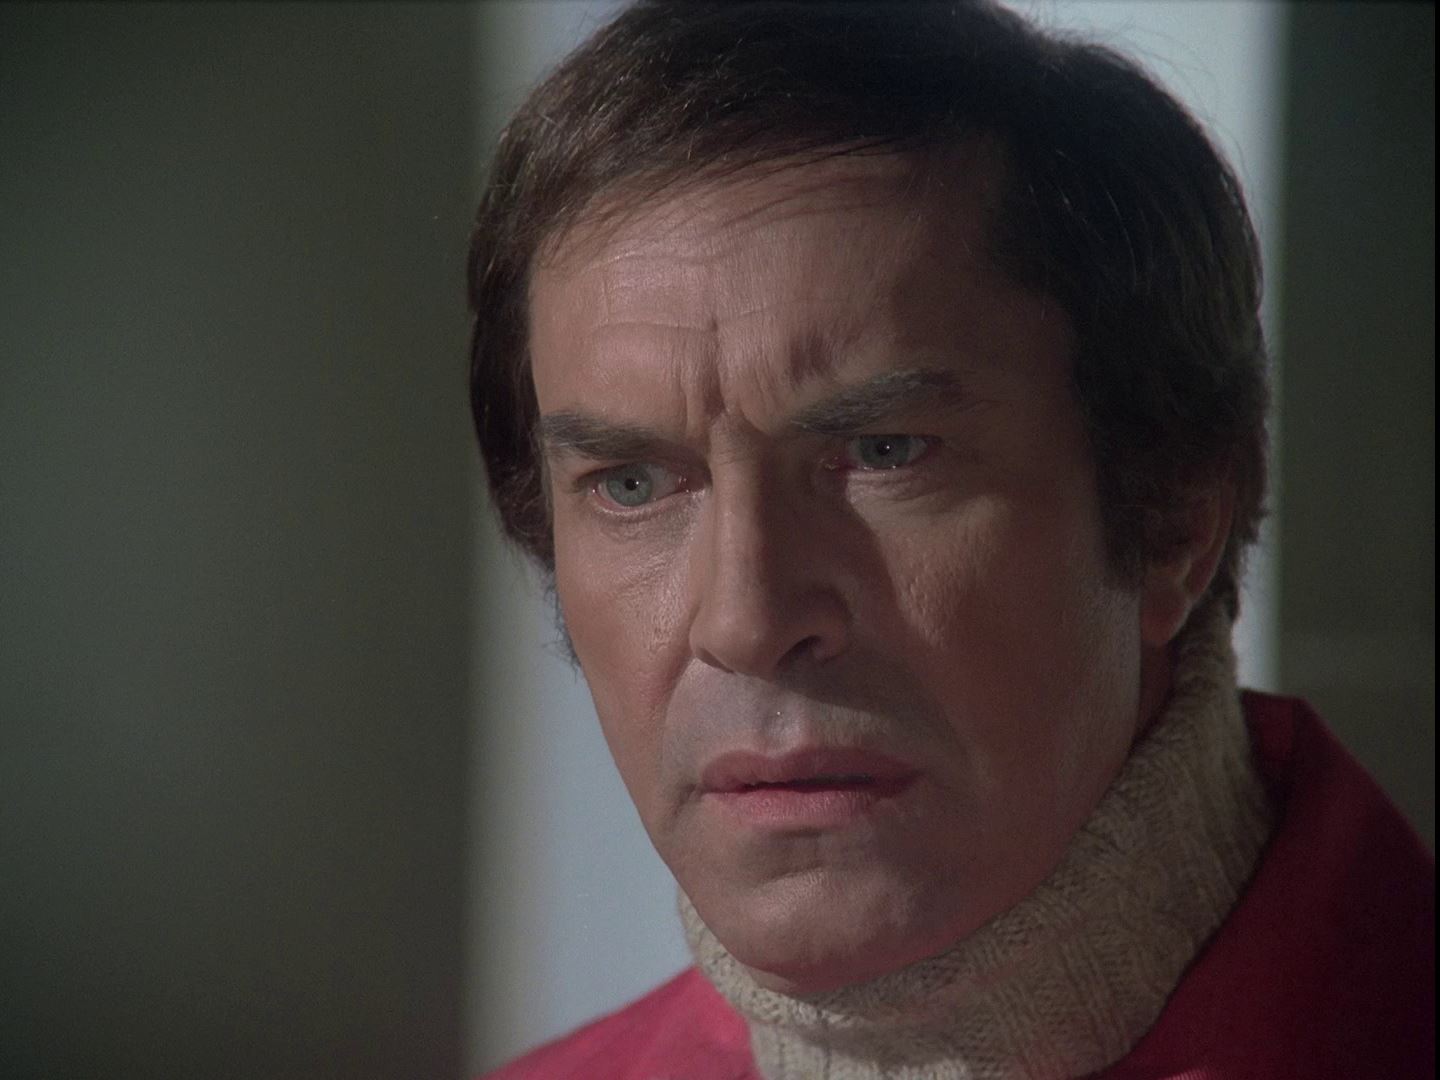 Space 1999 Catacombs One Moment Of Humanity